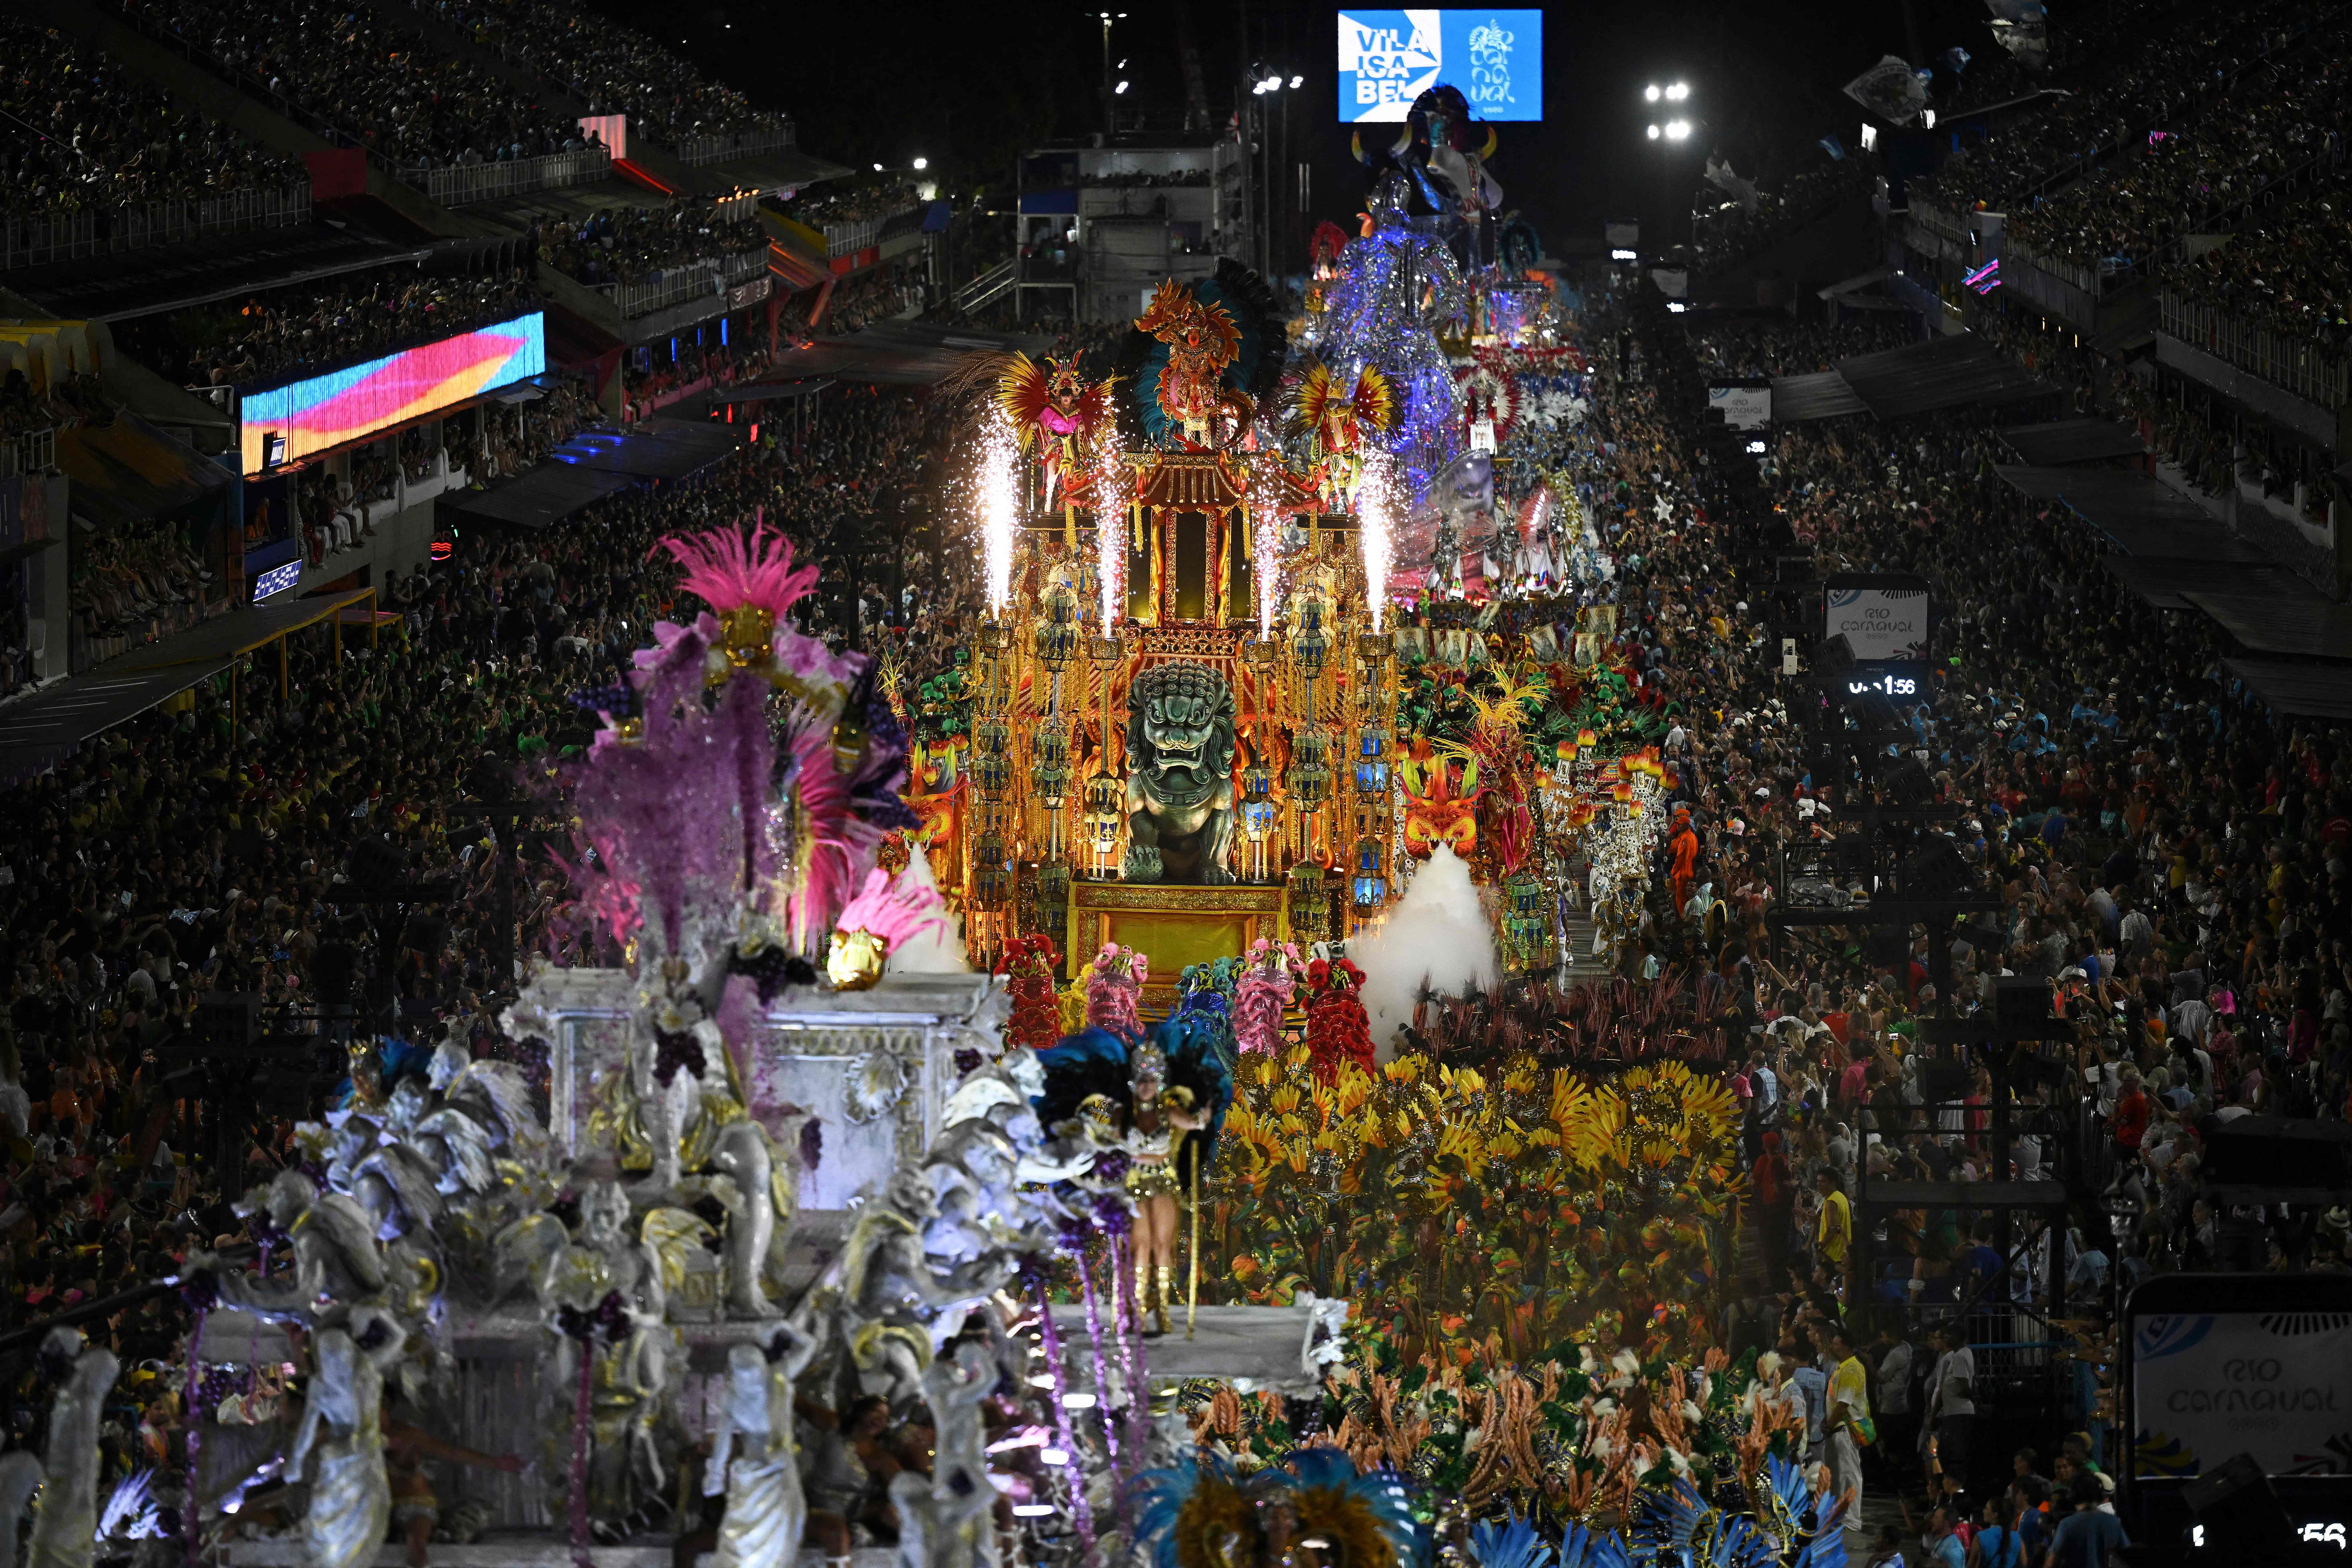 Several colorful floats are shown from above during Brazil's carnival parade